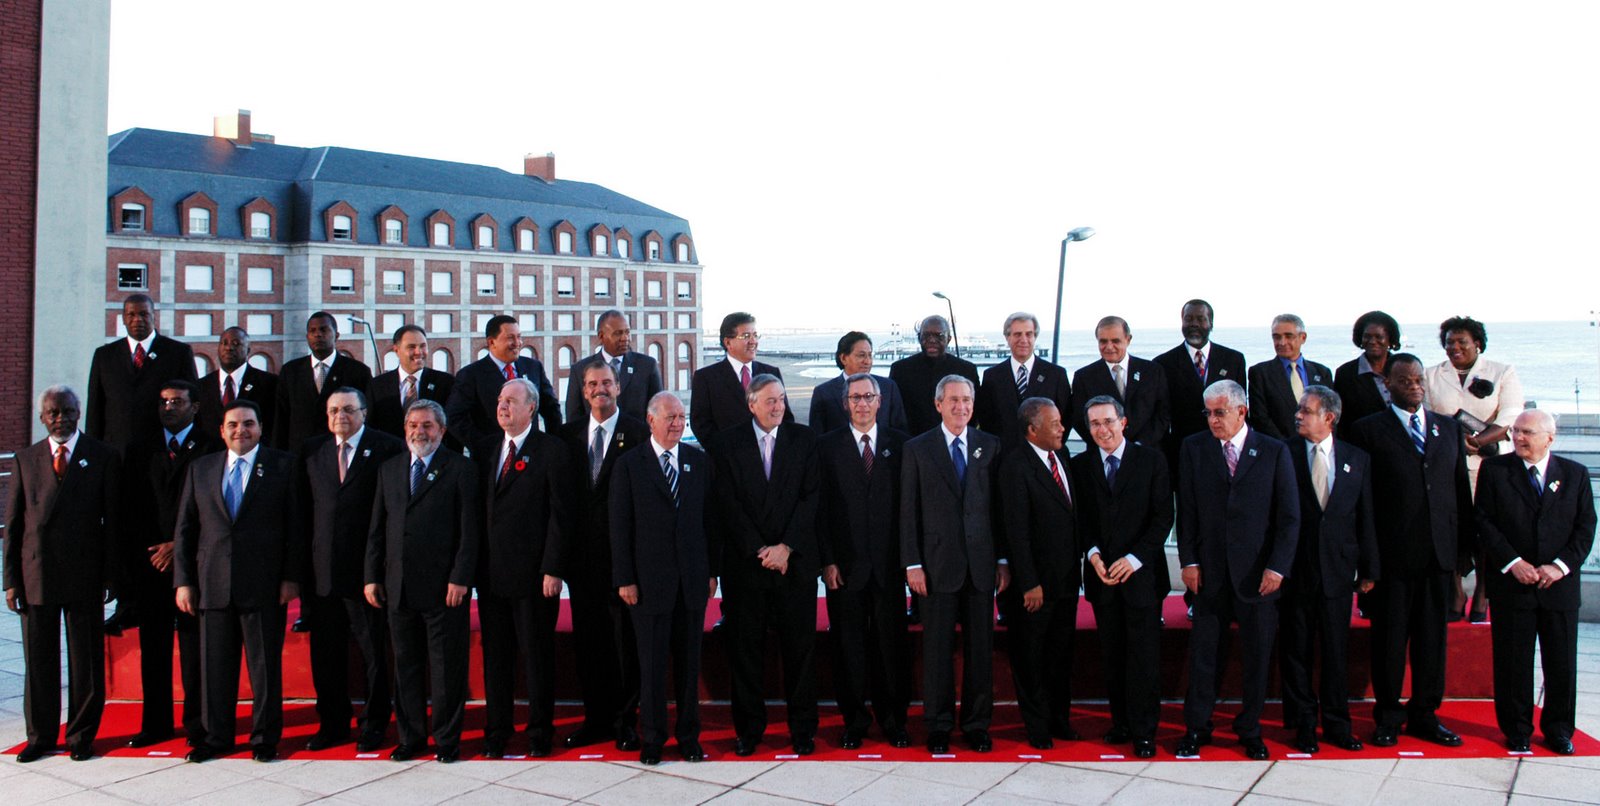 [Head_of_States_at_the_Americas_Summit_in_Mar_del_Plata_Argentina_2005.jpg]